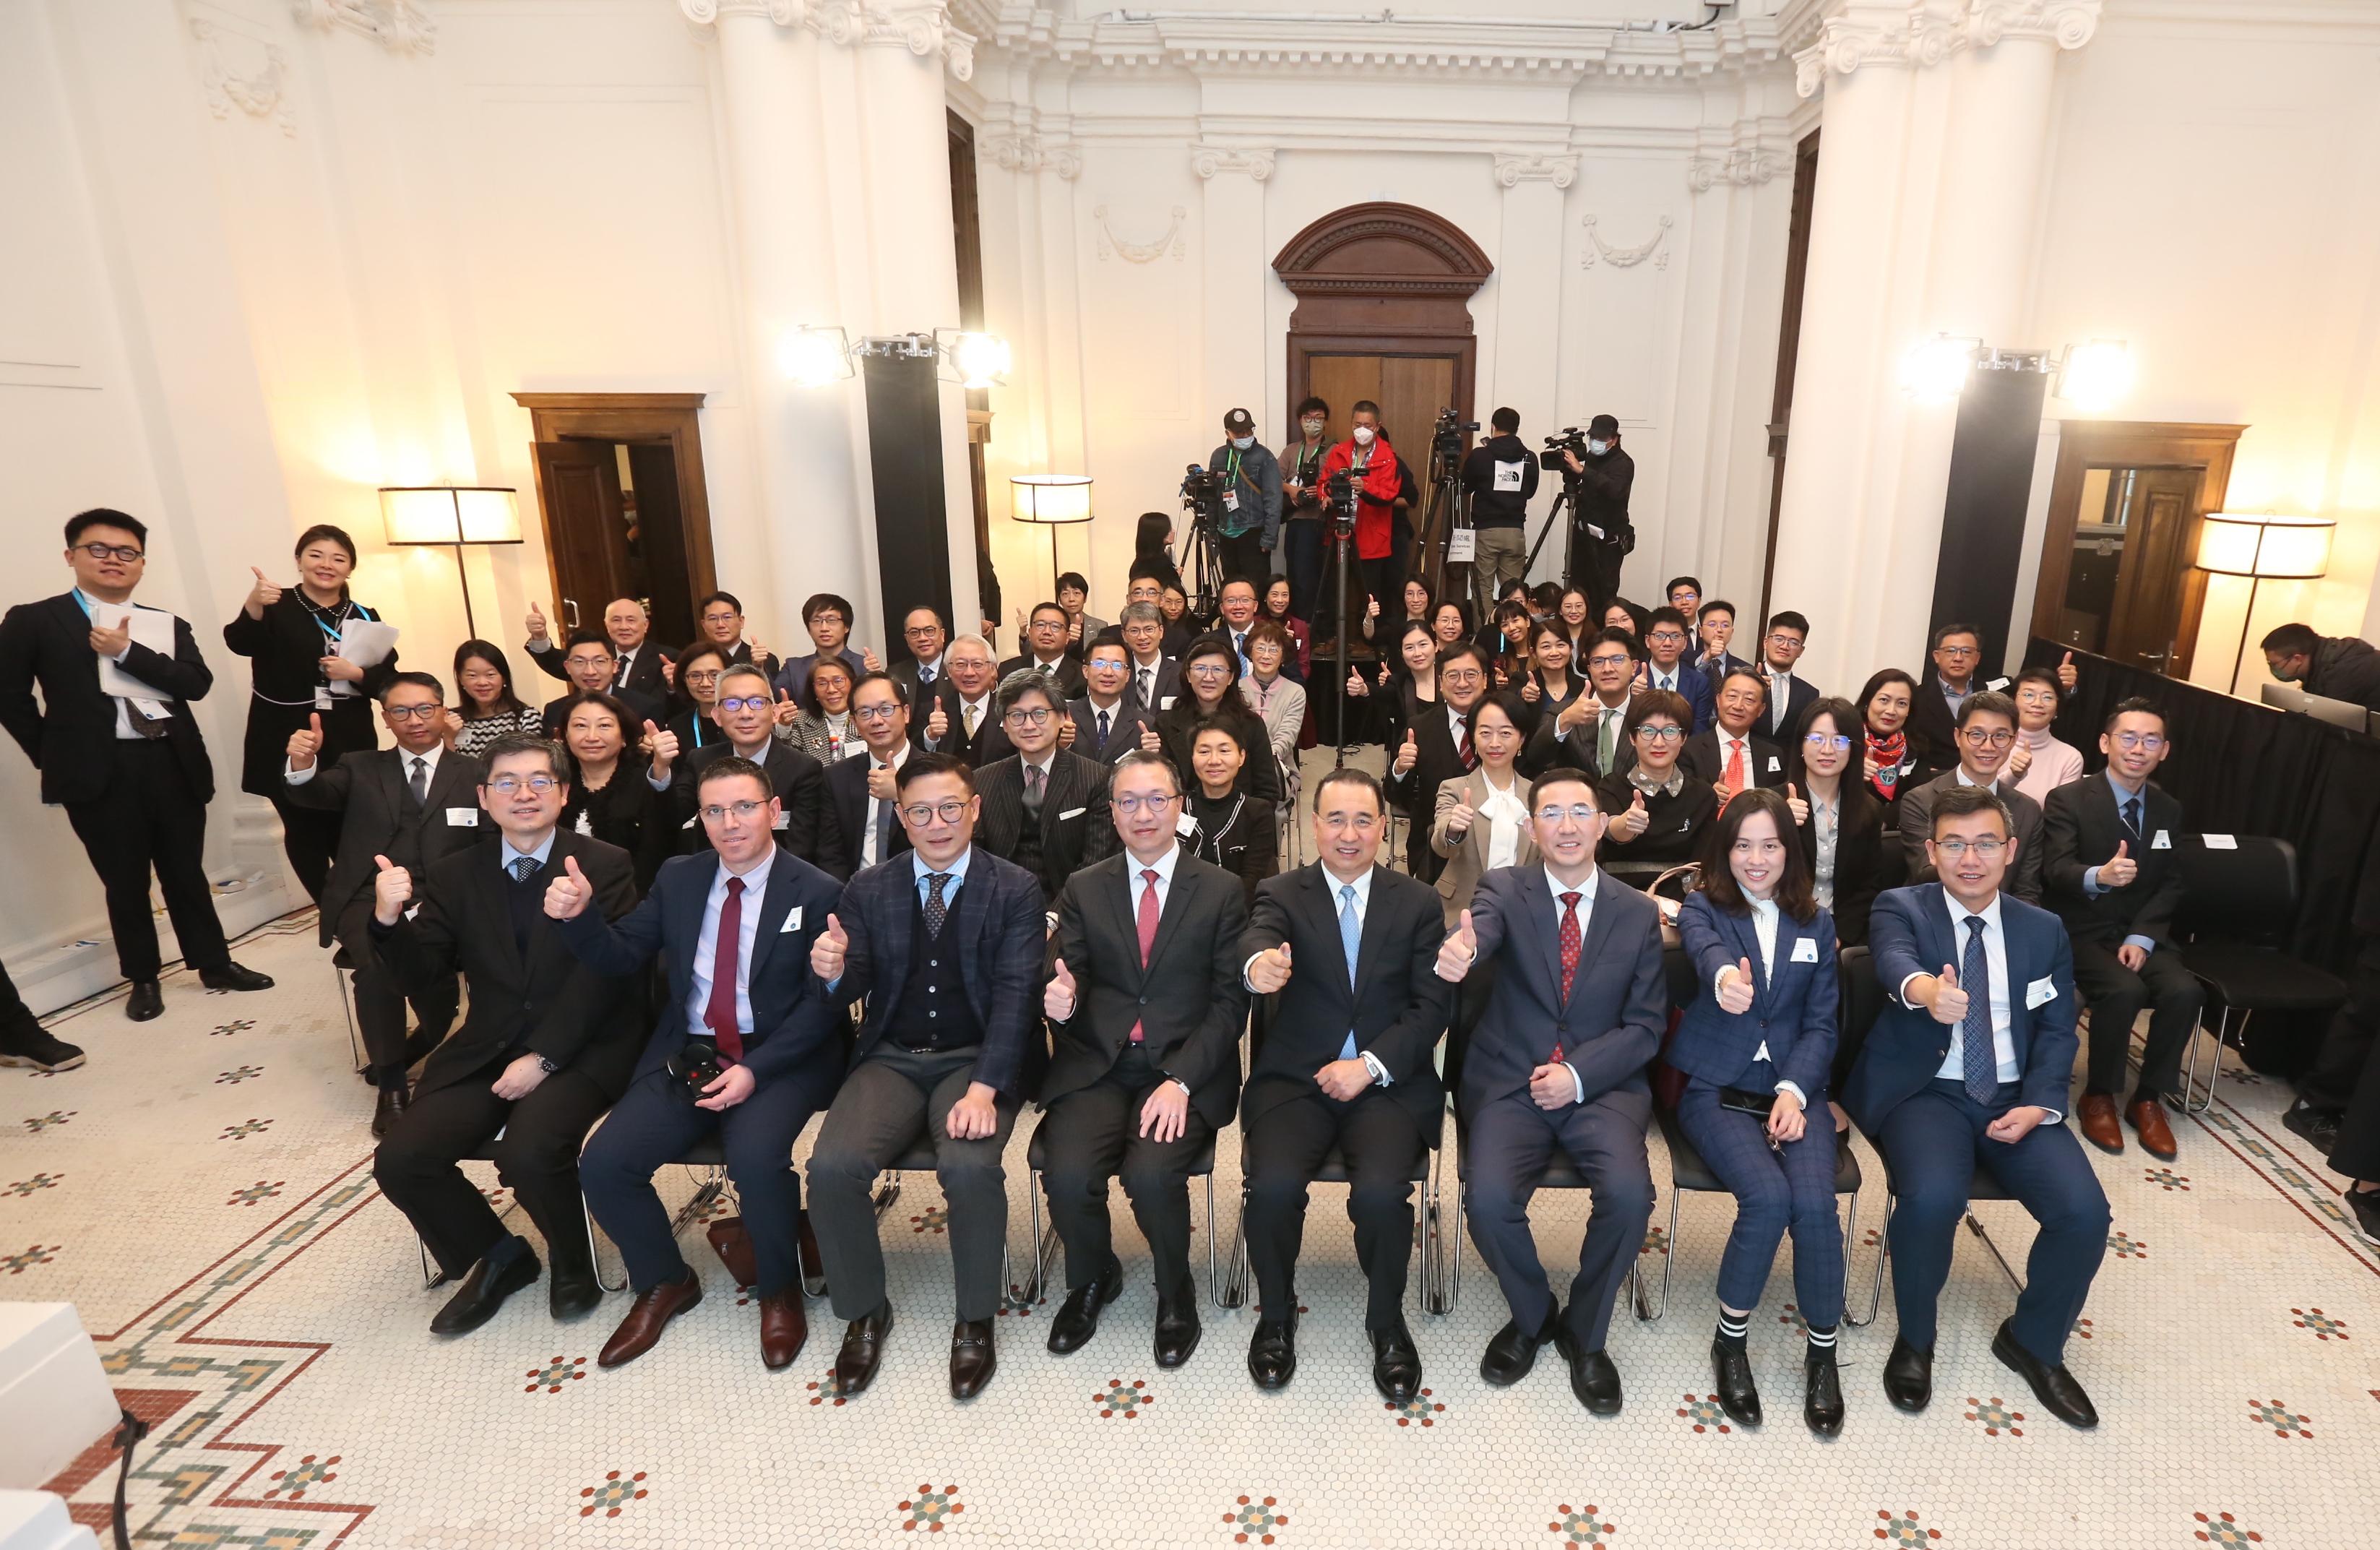 With strong support from the Central People's Government, the inauguration ceremony for the International Organization for Mediation Preparatory Office was held today (February 16) at the Hong Kong Legal Hub. Photo shows the guests at the inauguration ceremony.